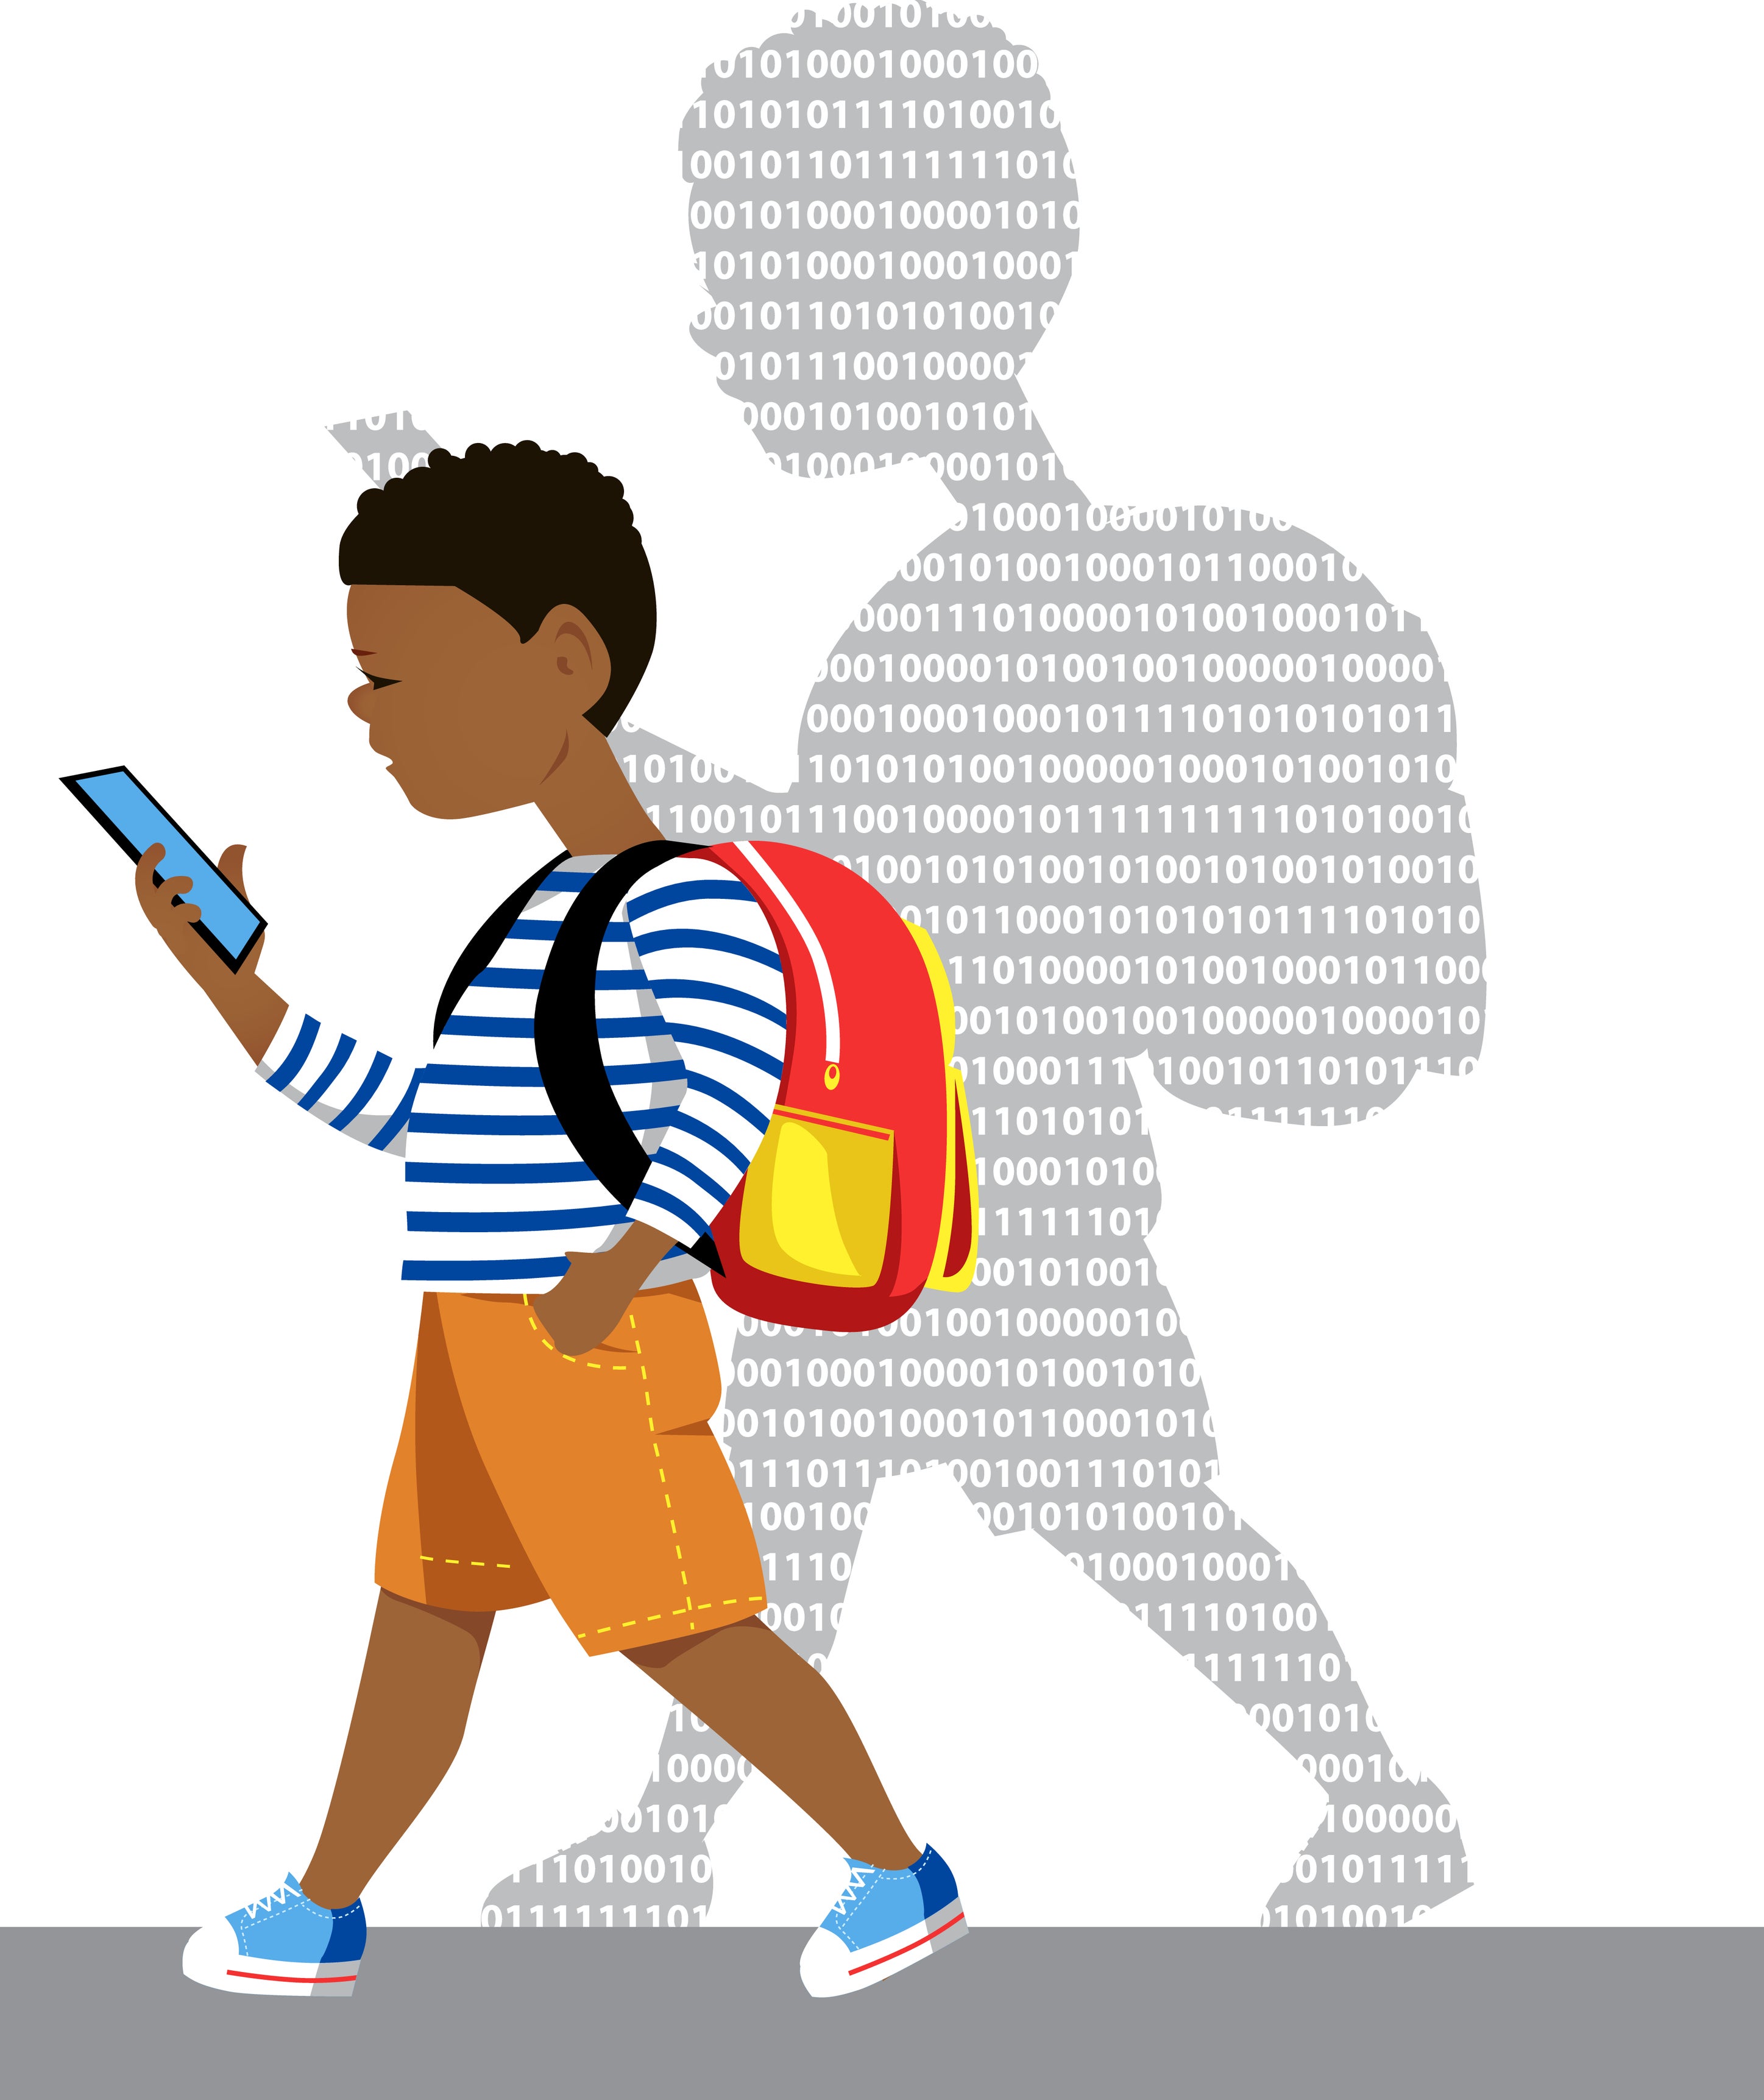 Little boy walking with a smartphone, his shadow showing computer code